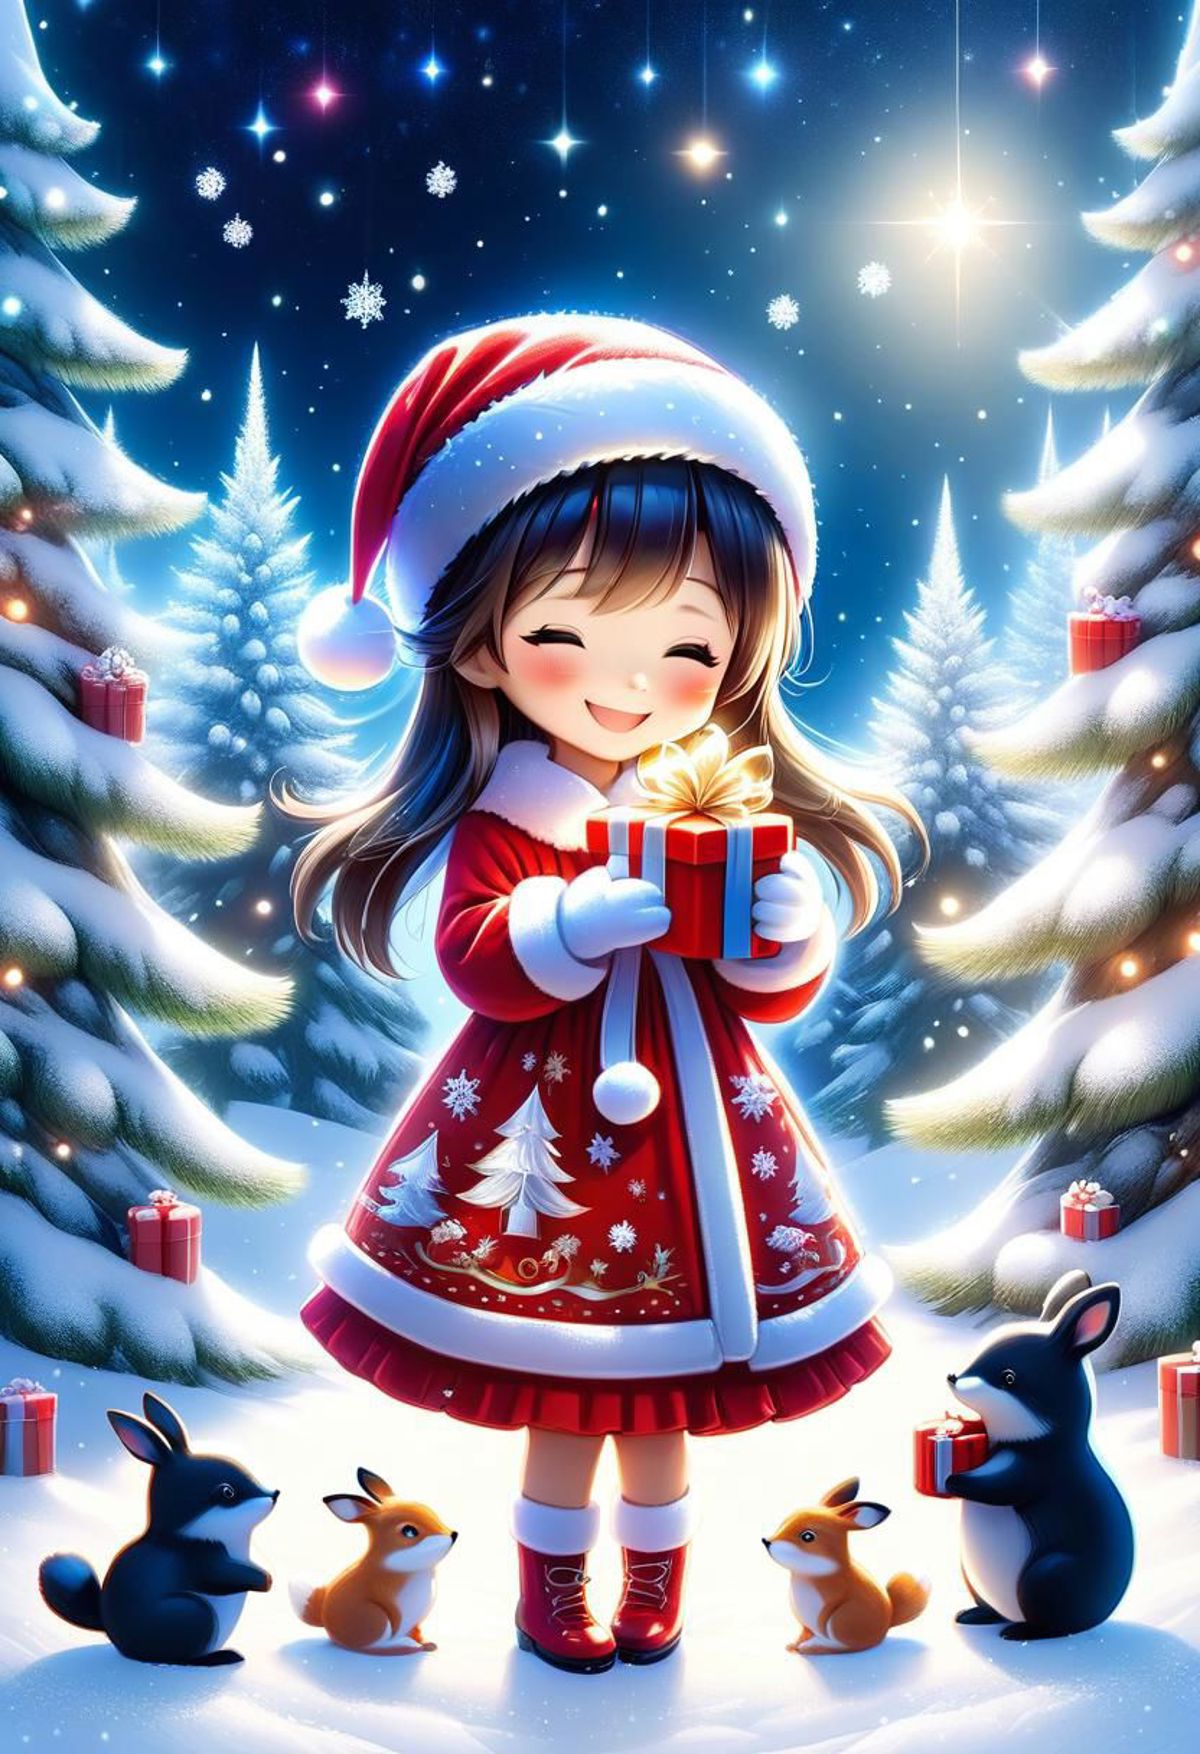 A Smiling Girl with a Gift in Winter Clothing and a Christmas Tree Background